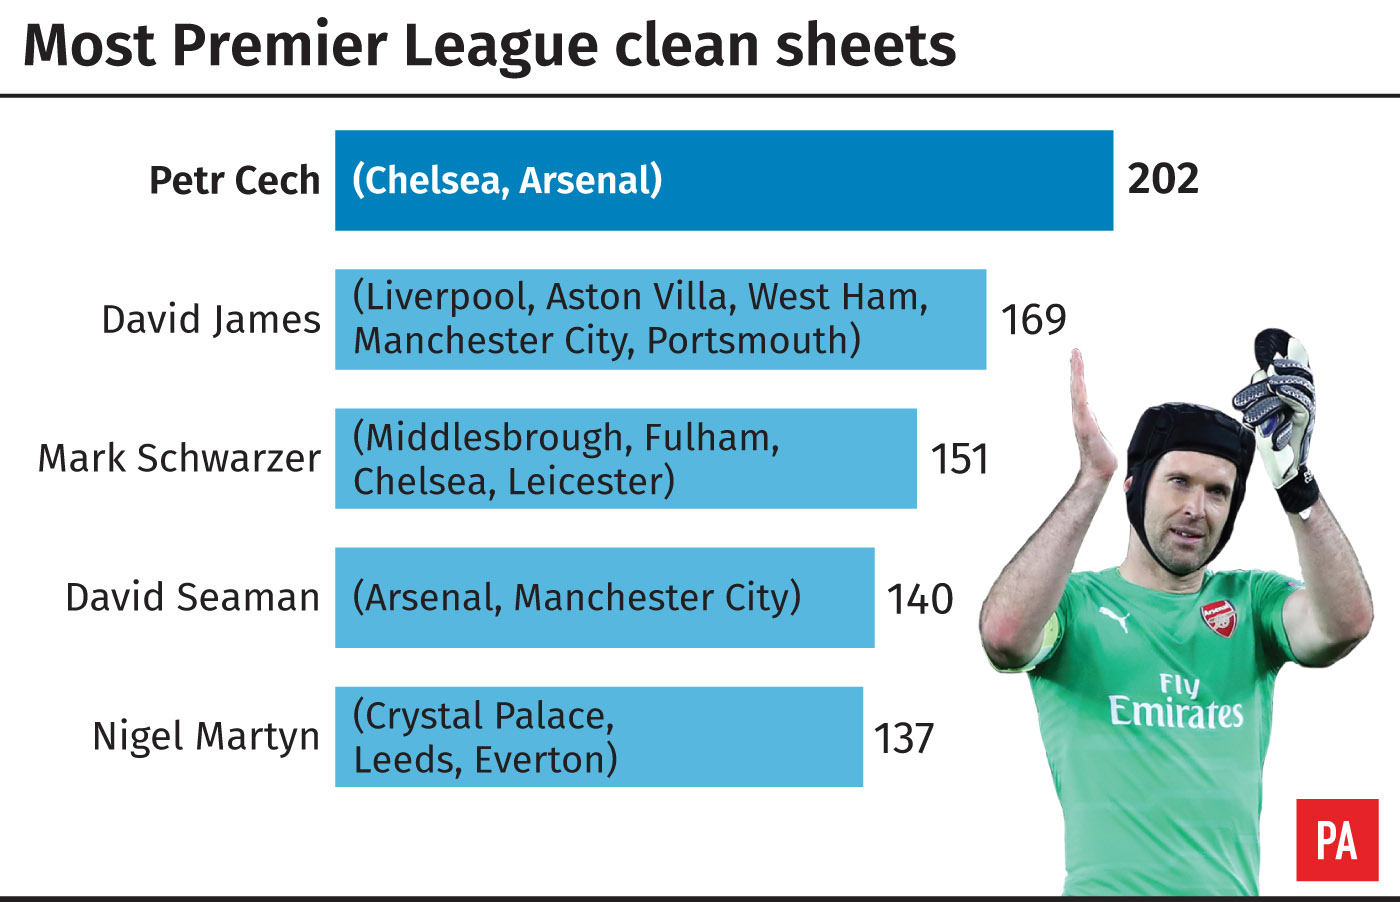 A look at the numbers behind Petr Cech's recordbreaking Premier League